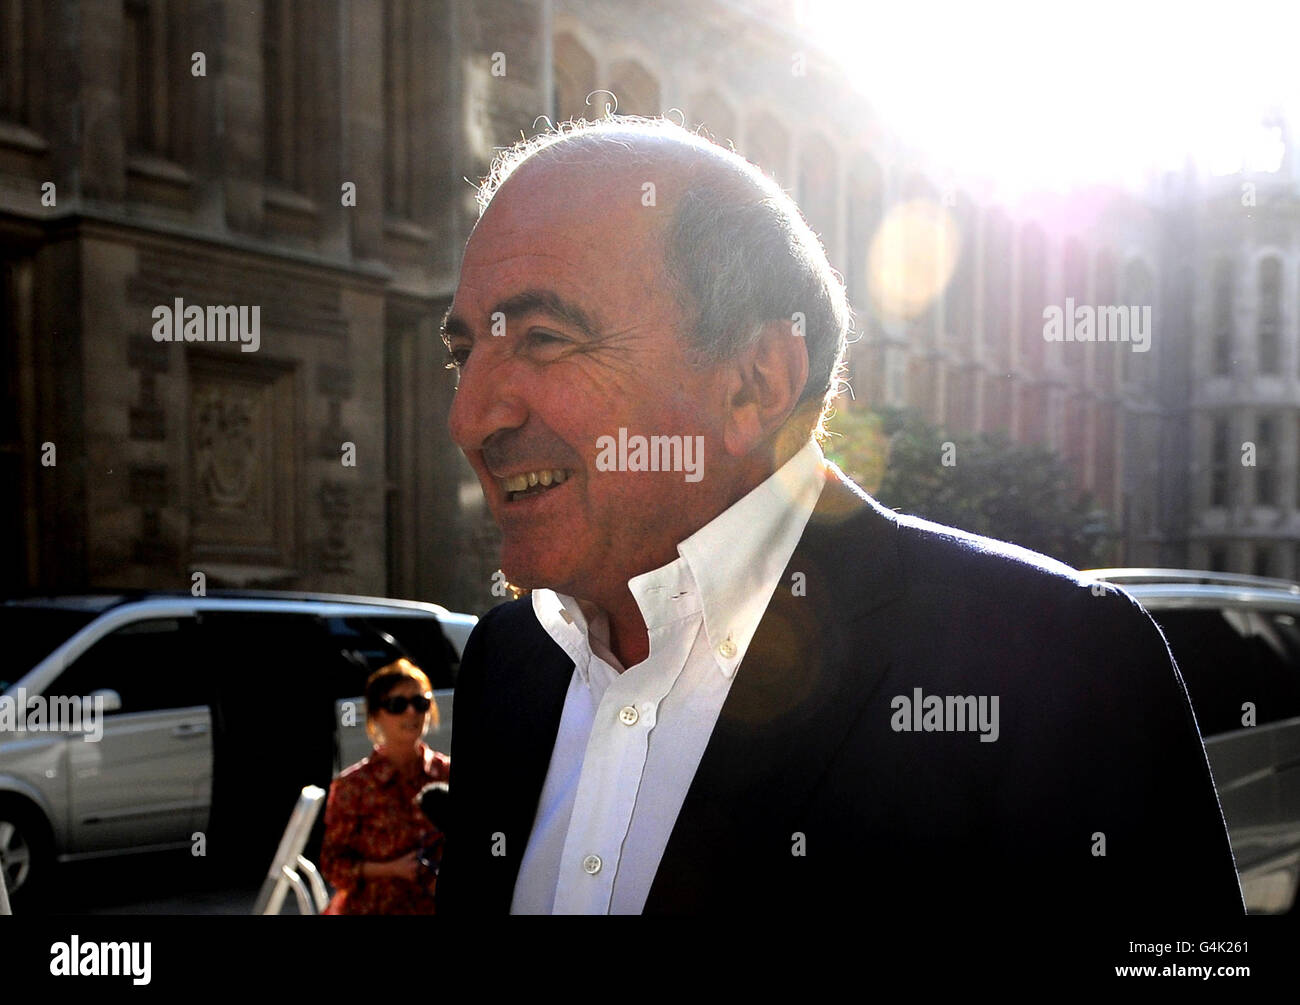 Russian oligarch Boris Berezovsky leaves the Commercial Court of the High Court in central London. Stock Photo